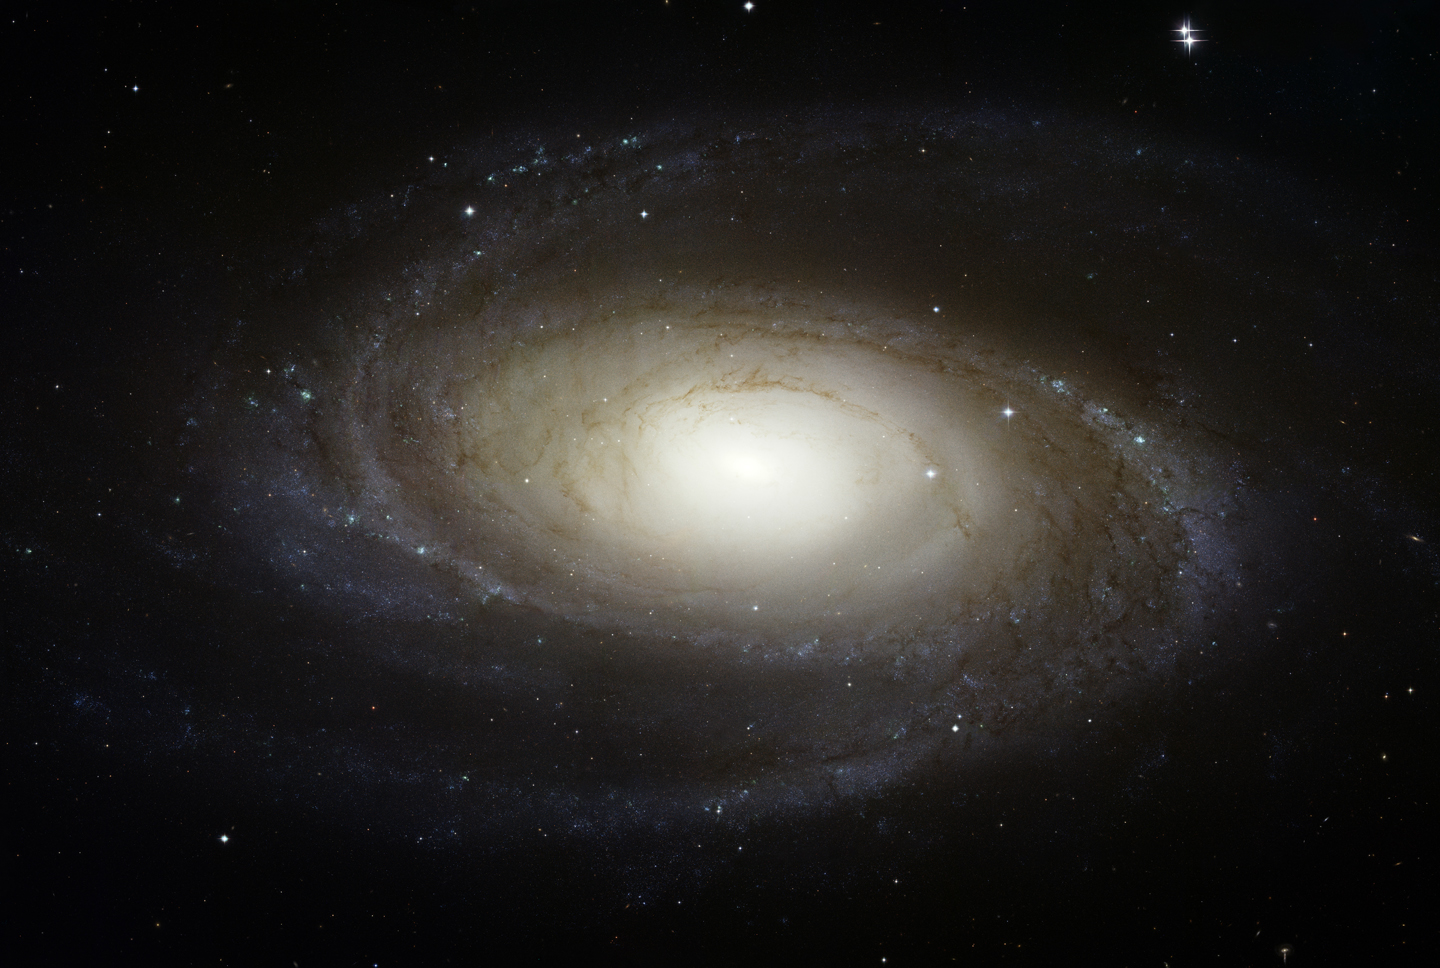 Bright Spiral Galaxy M81 from Hubble